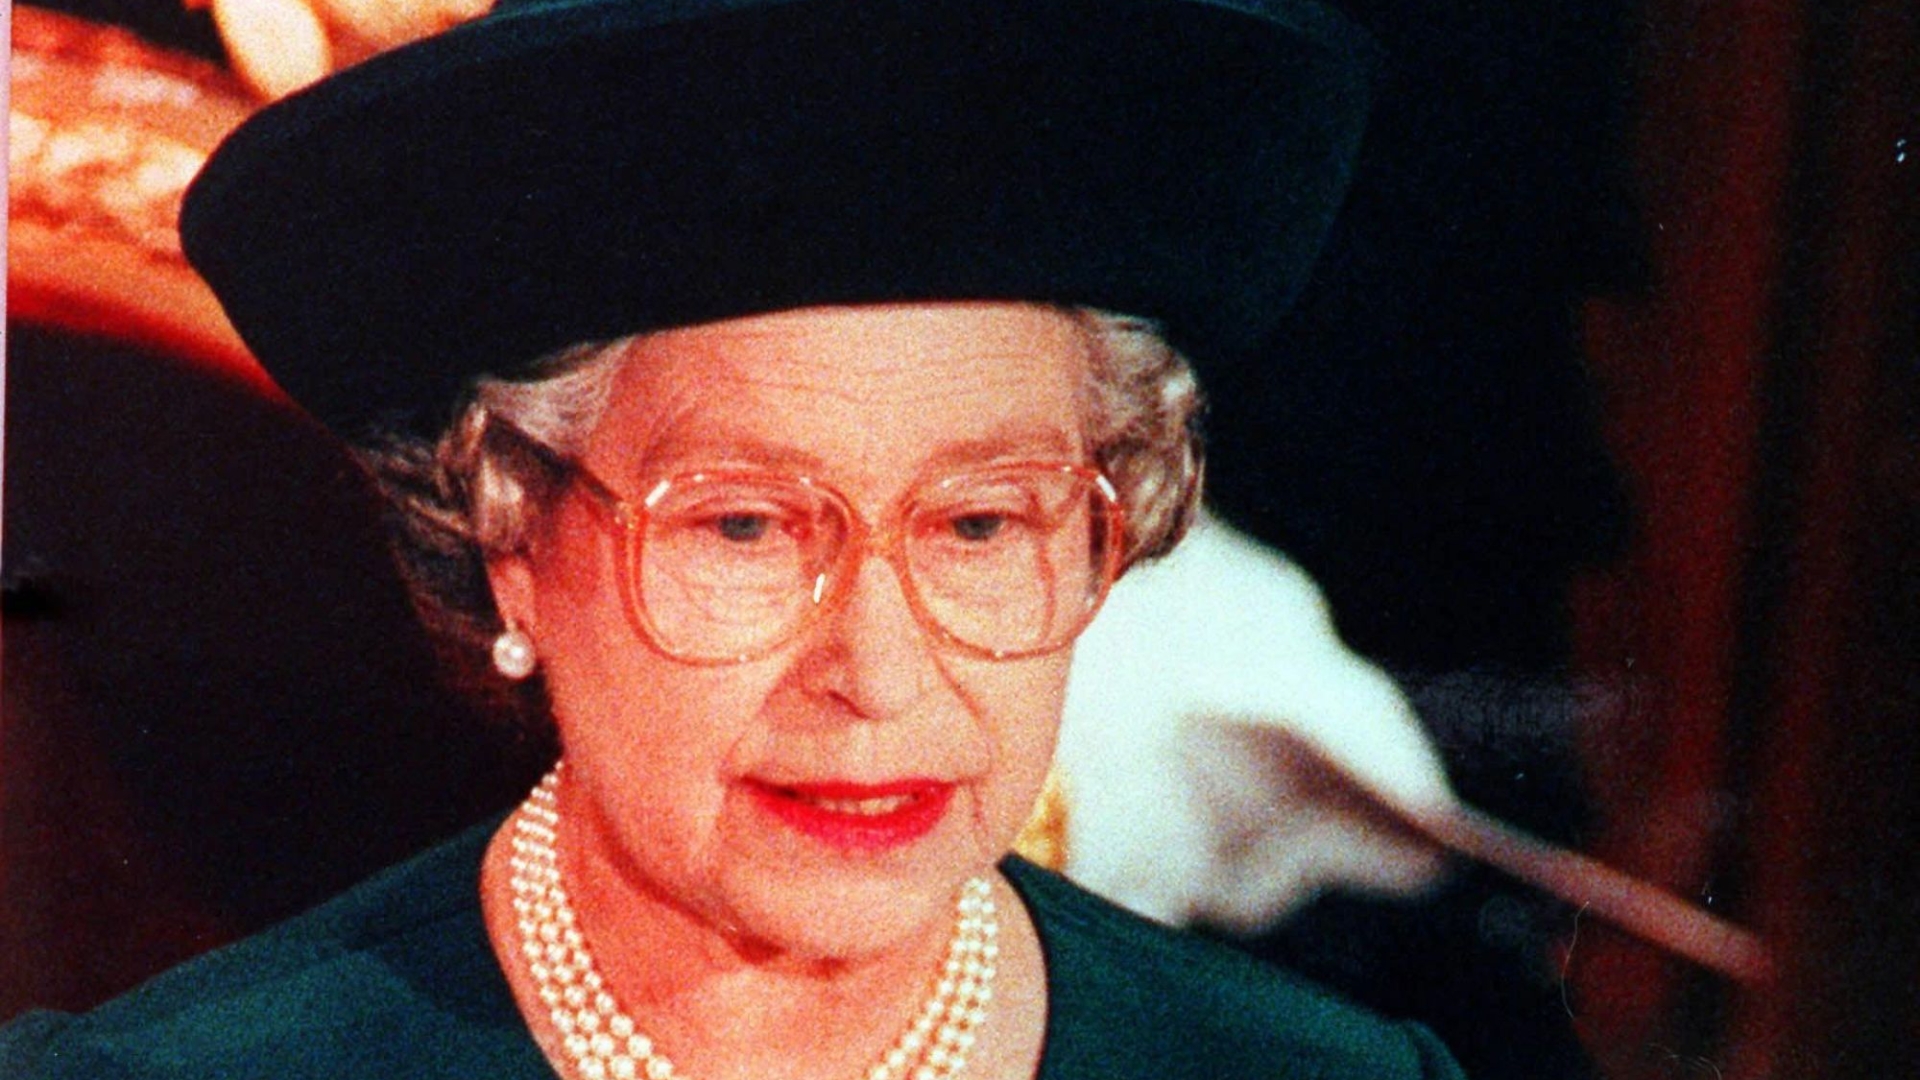 What was the Queen’s Annus horribilis Year and when did it occur?